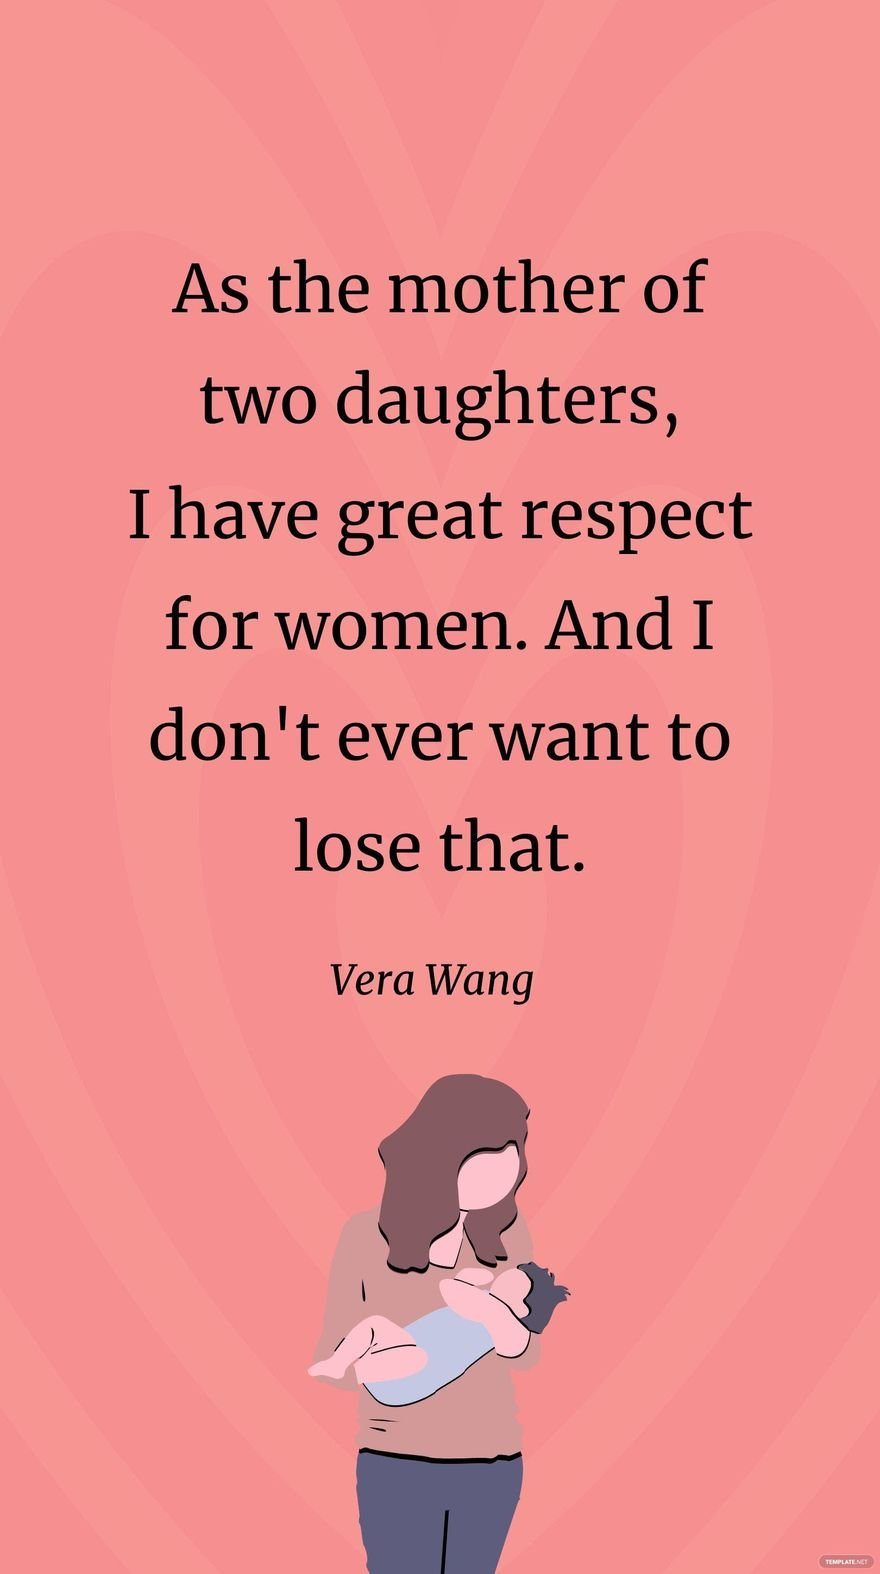 Free Vera Wang- As the mother of two daughters, I have great respect for women. And I don't ever want to lose that. in JPG